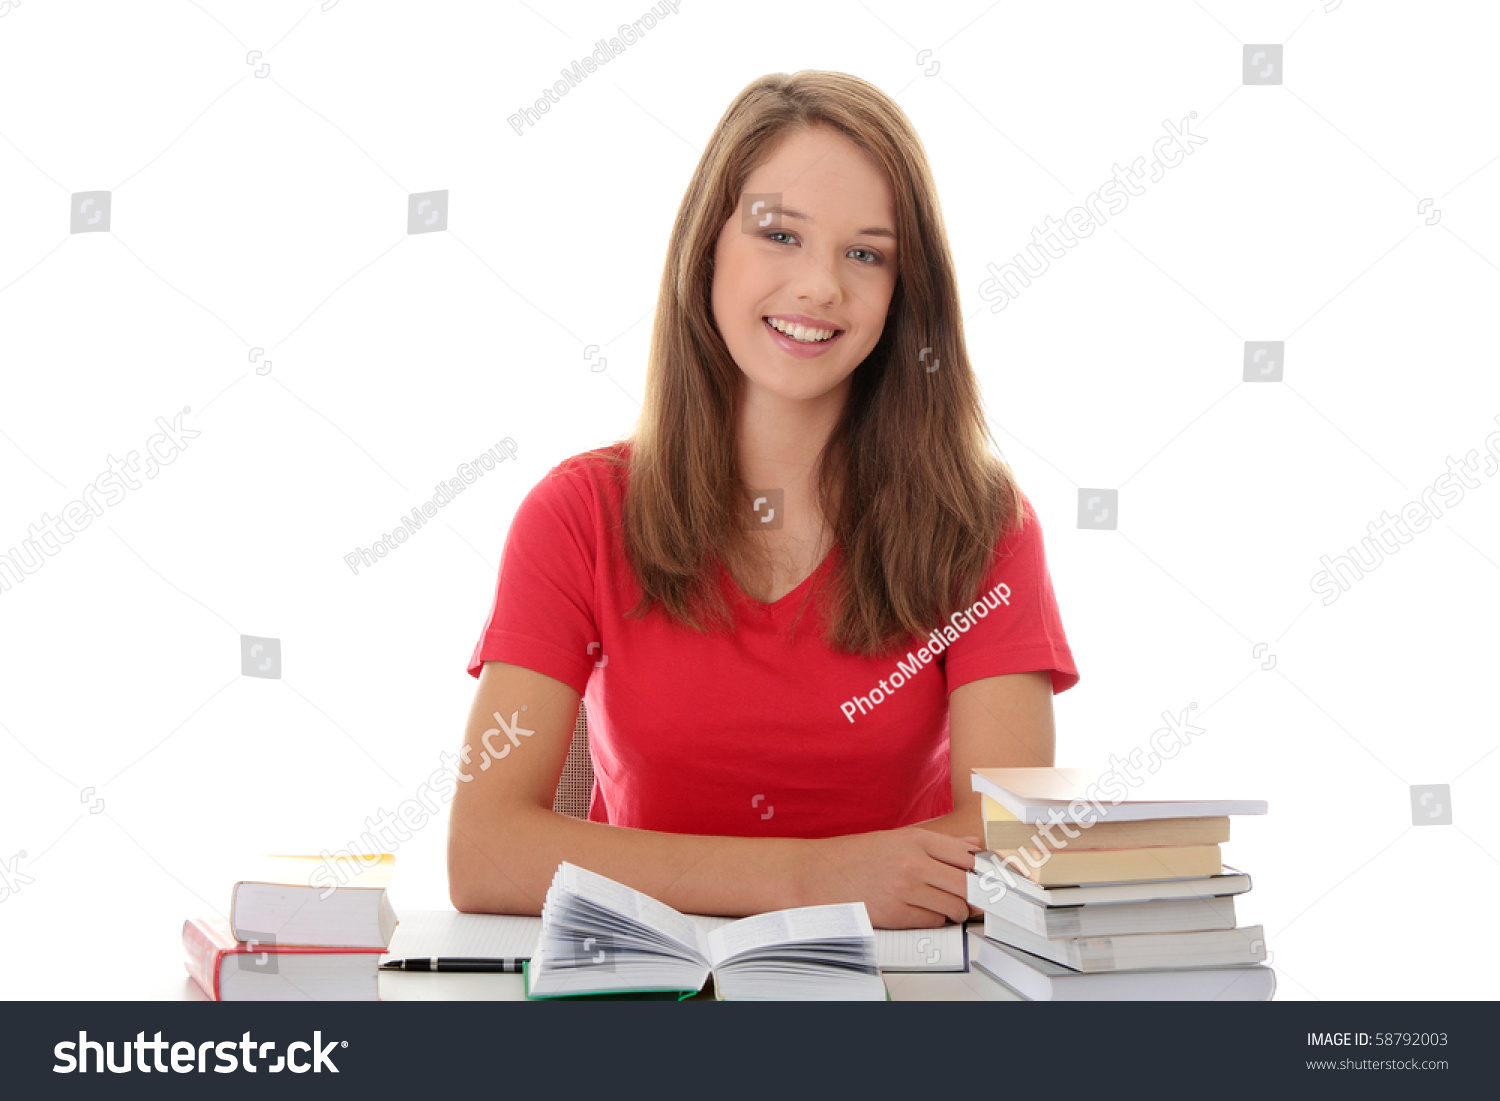 Teen Girl Learning Desk Isolated On Royalty Free Stock Image